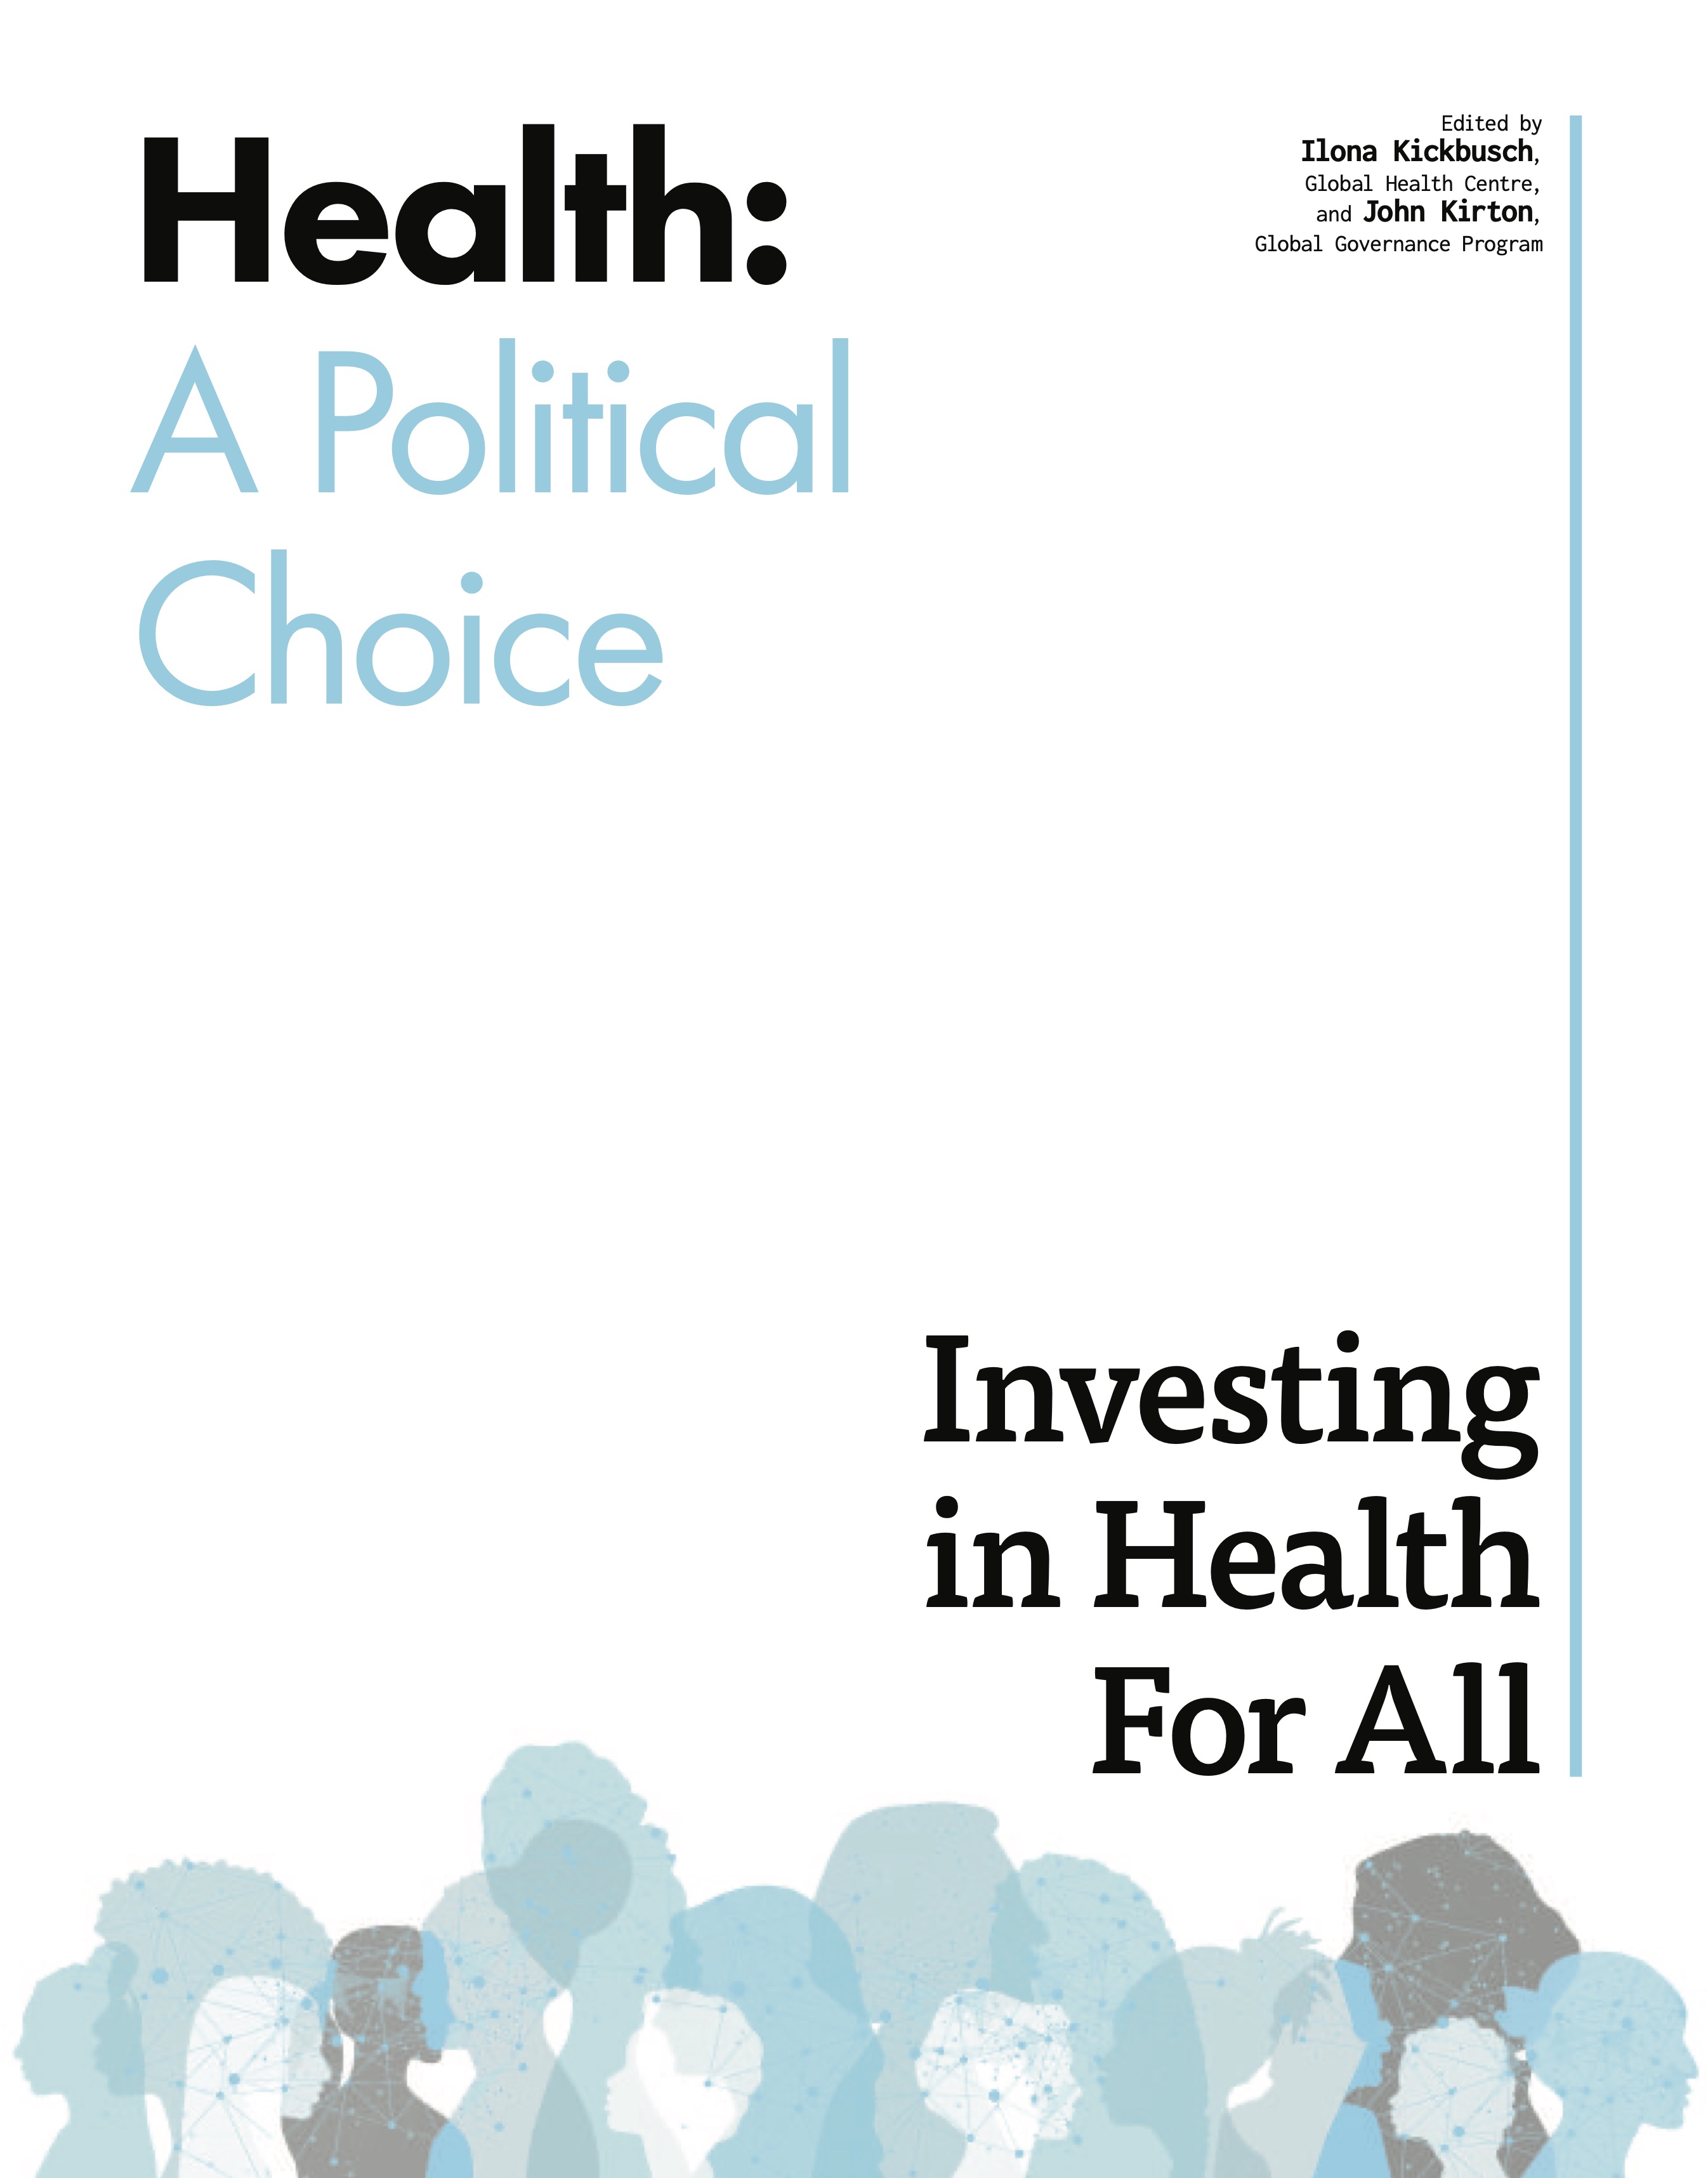 Health: A Political Choice – Investing in Health For All